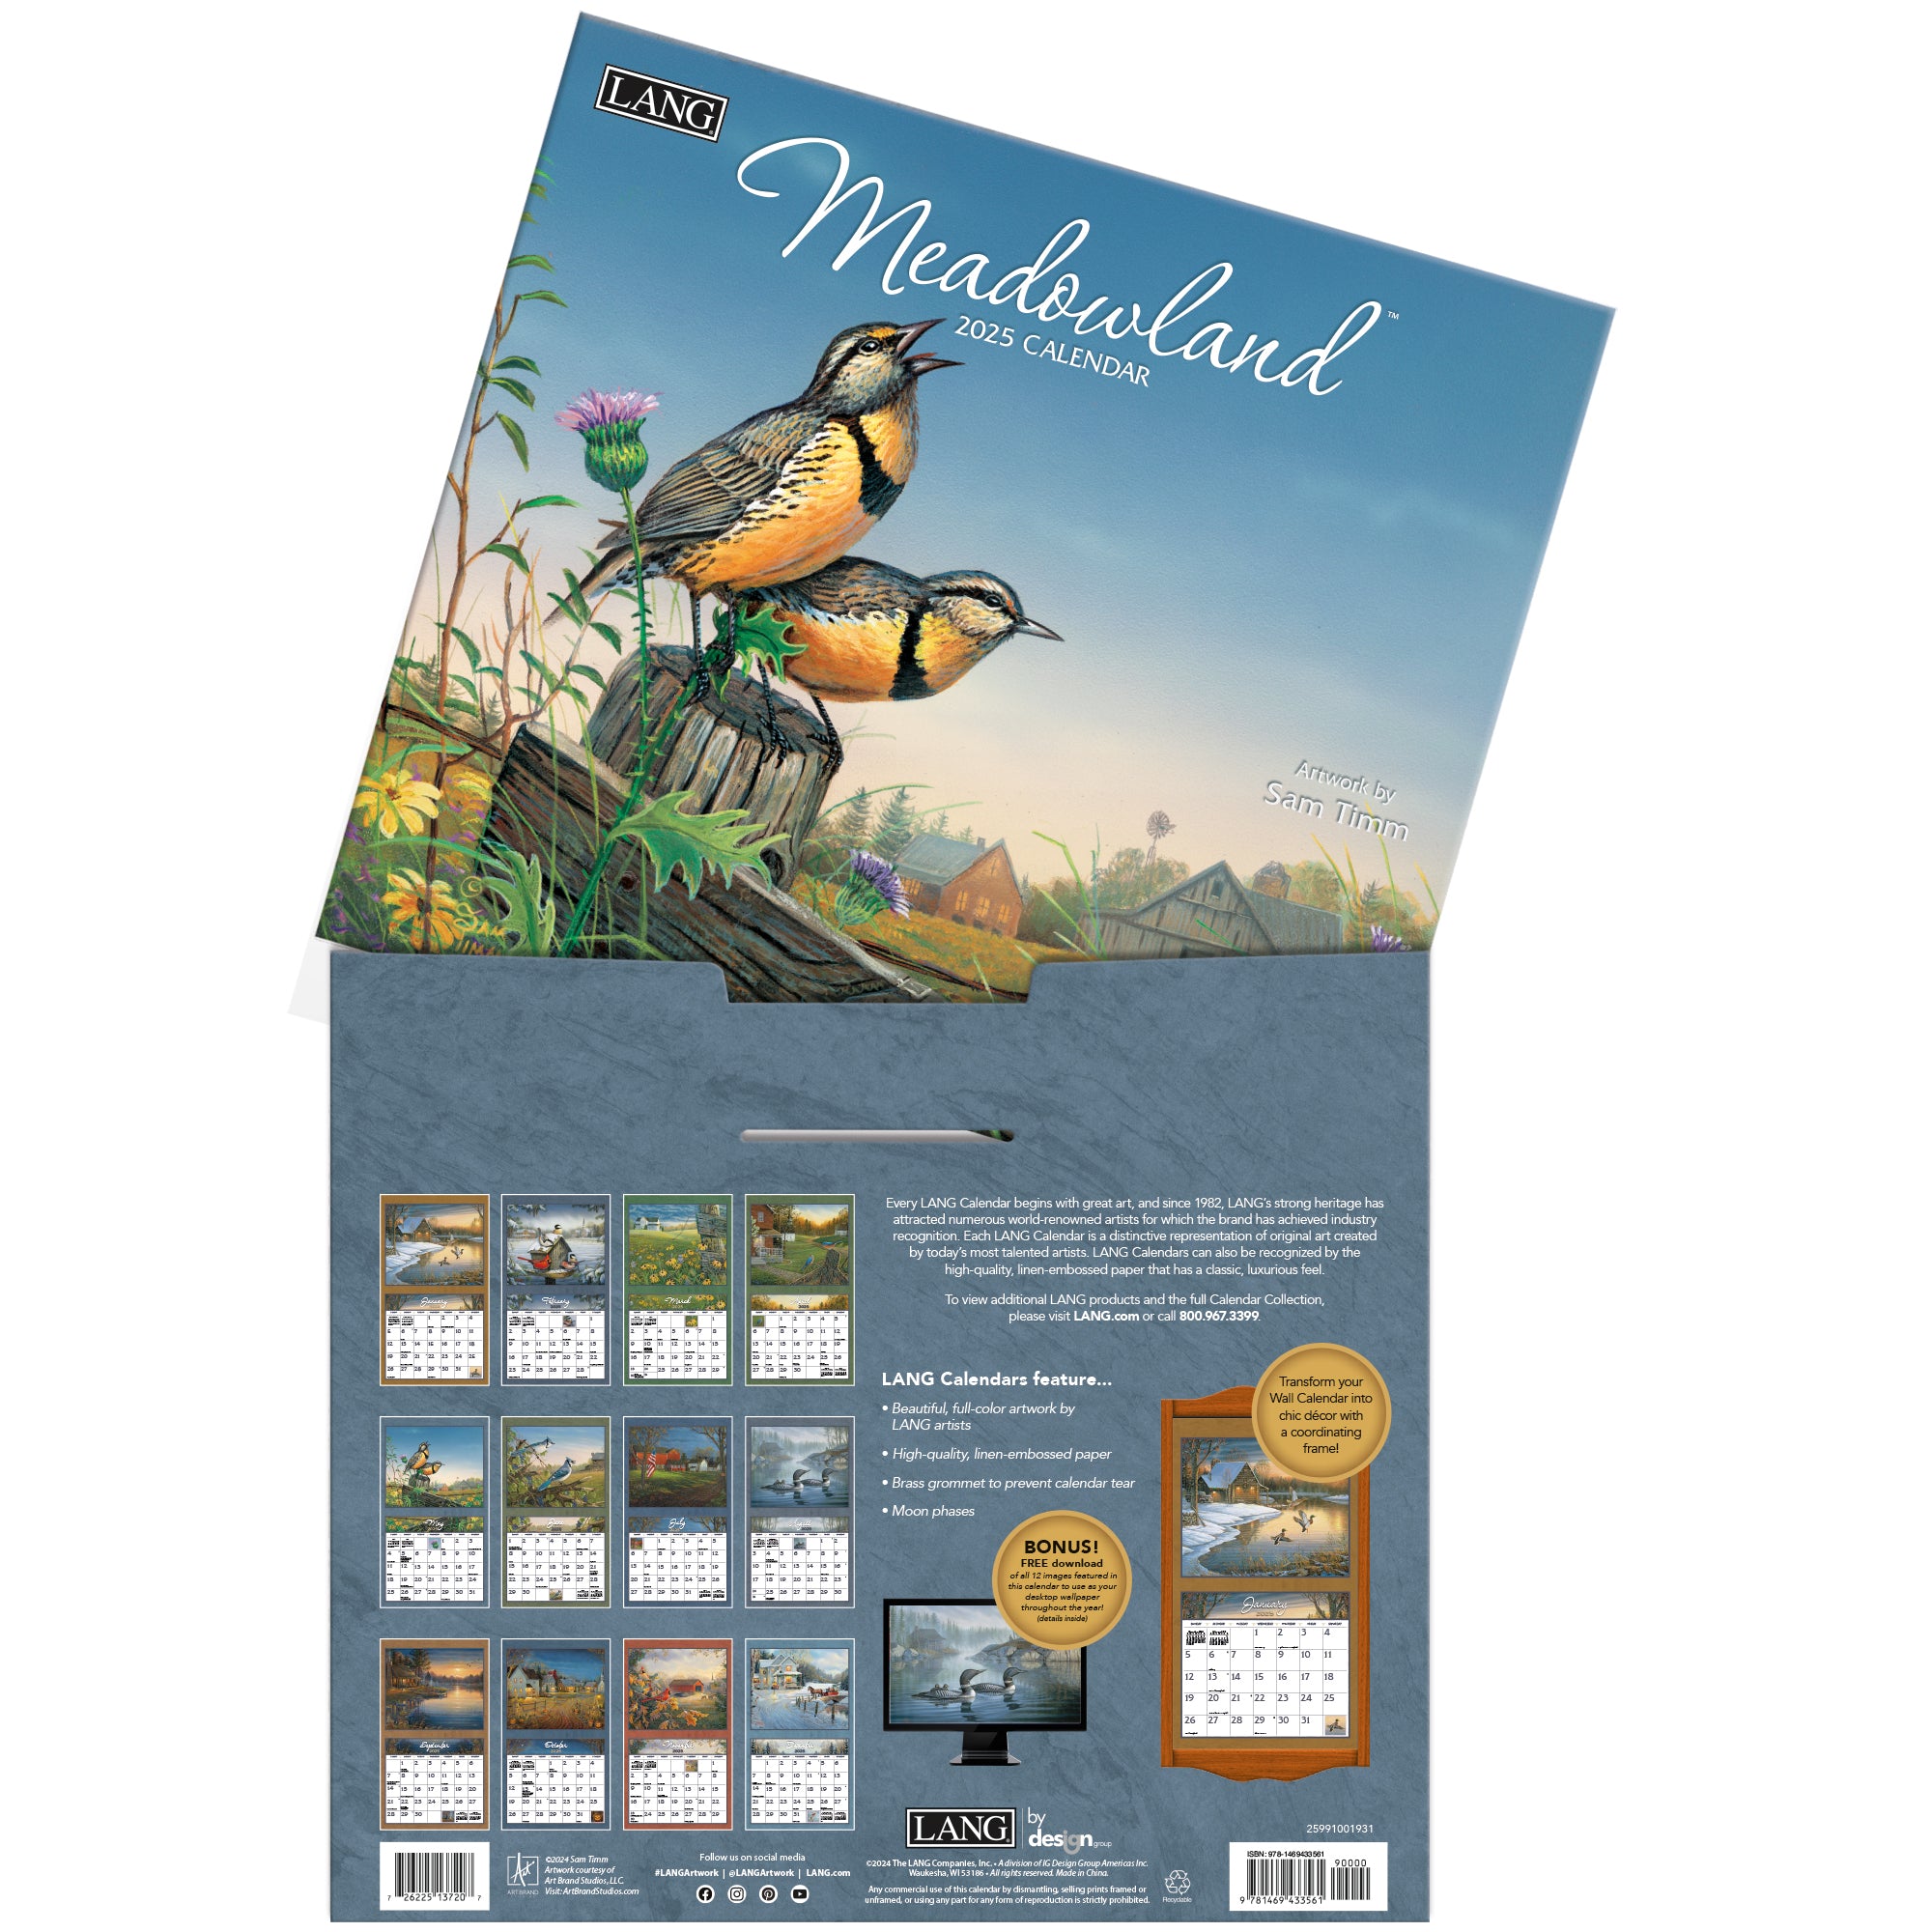 2025 LANG Meadowland By Sam Timm - Deluxe Wall Calendar